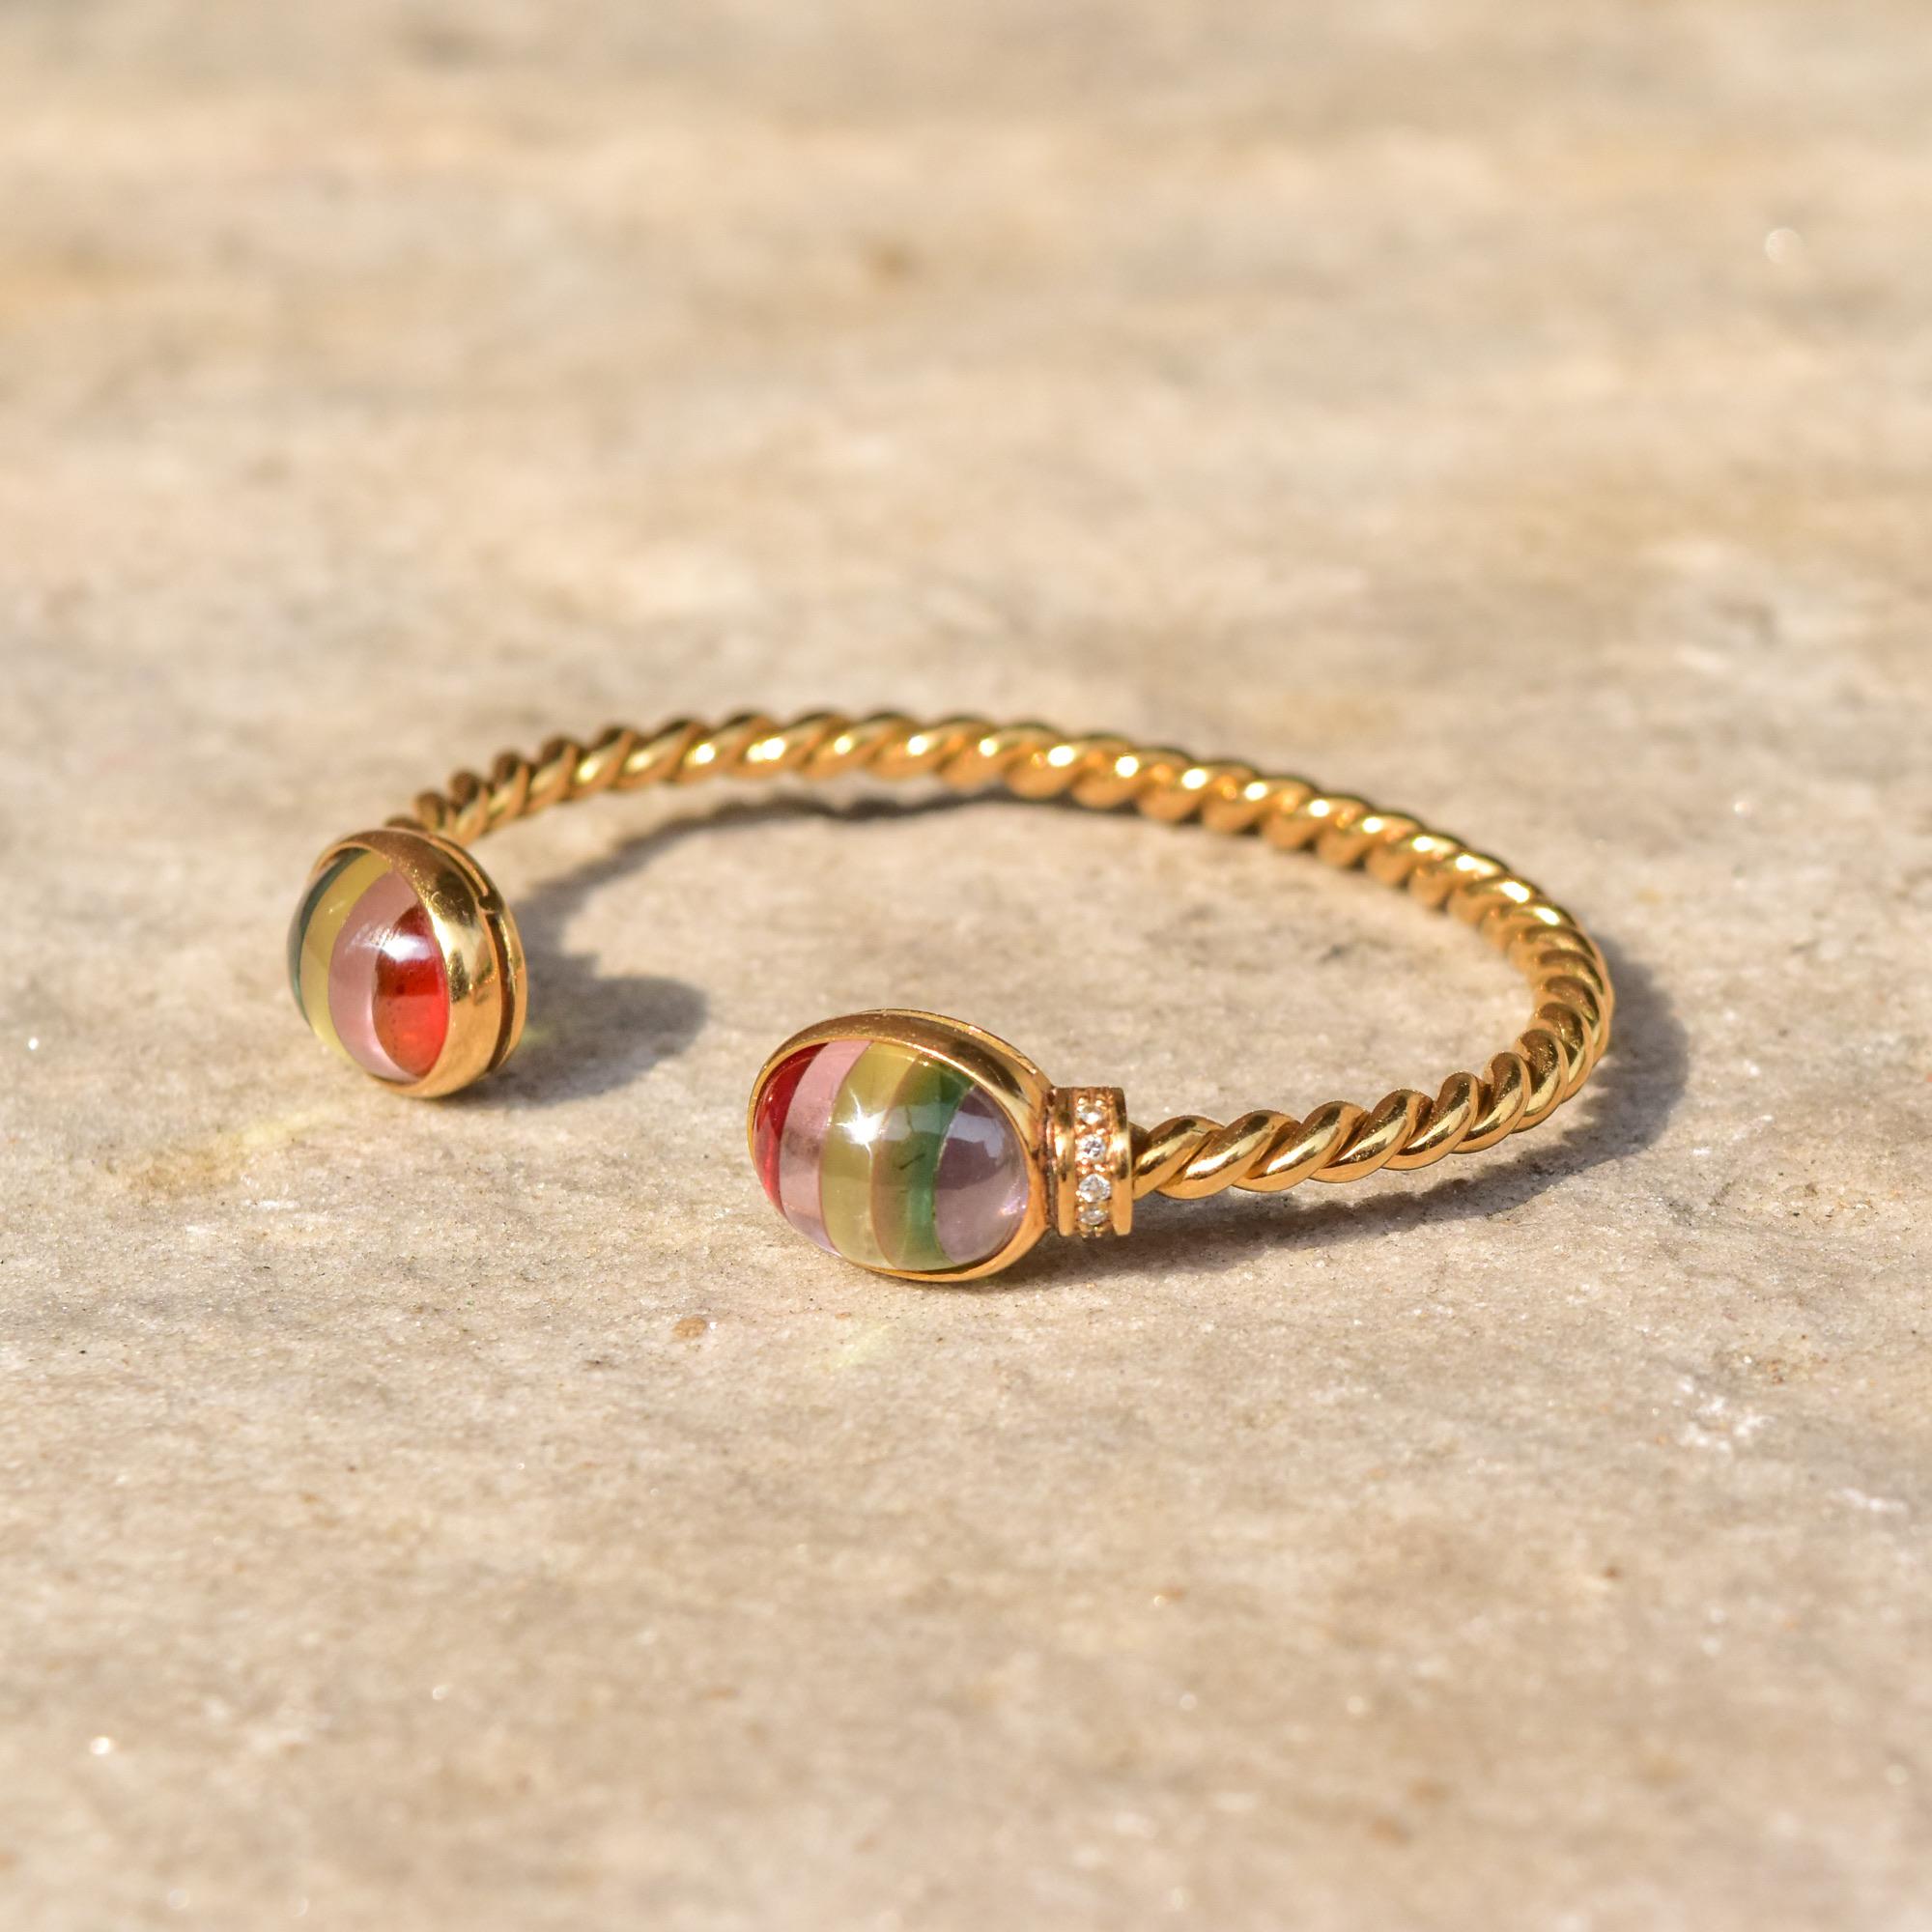 An incredibly unique 18K yellow gold striped glass cabochon cuff bracelet with diamond accents. Features a solid gold spiral rope chain bracelet, 4mm in diameter, with a multi-color glass cabochon bezel set on each end with a 5-diamond pave design